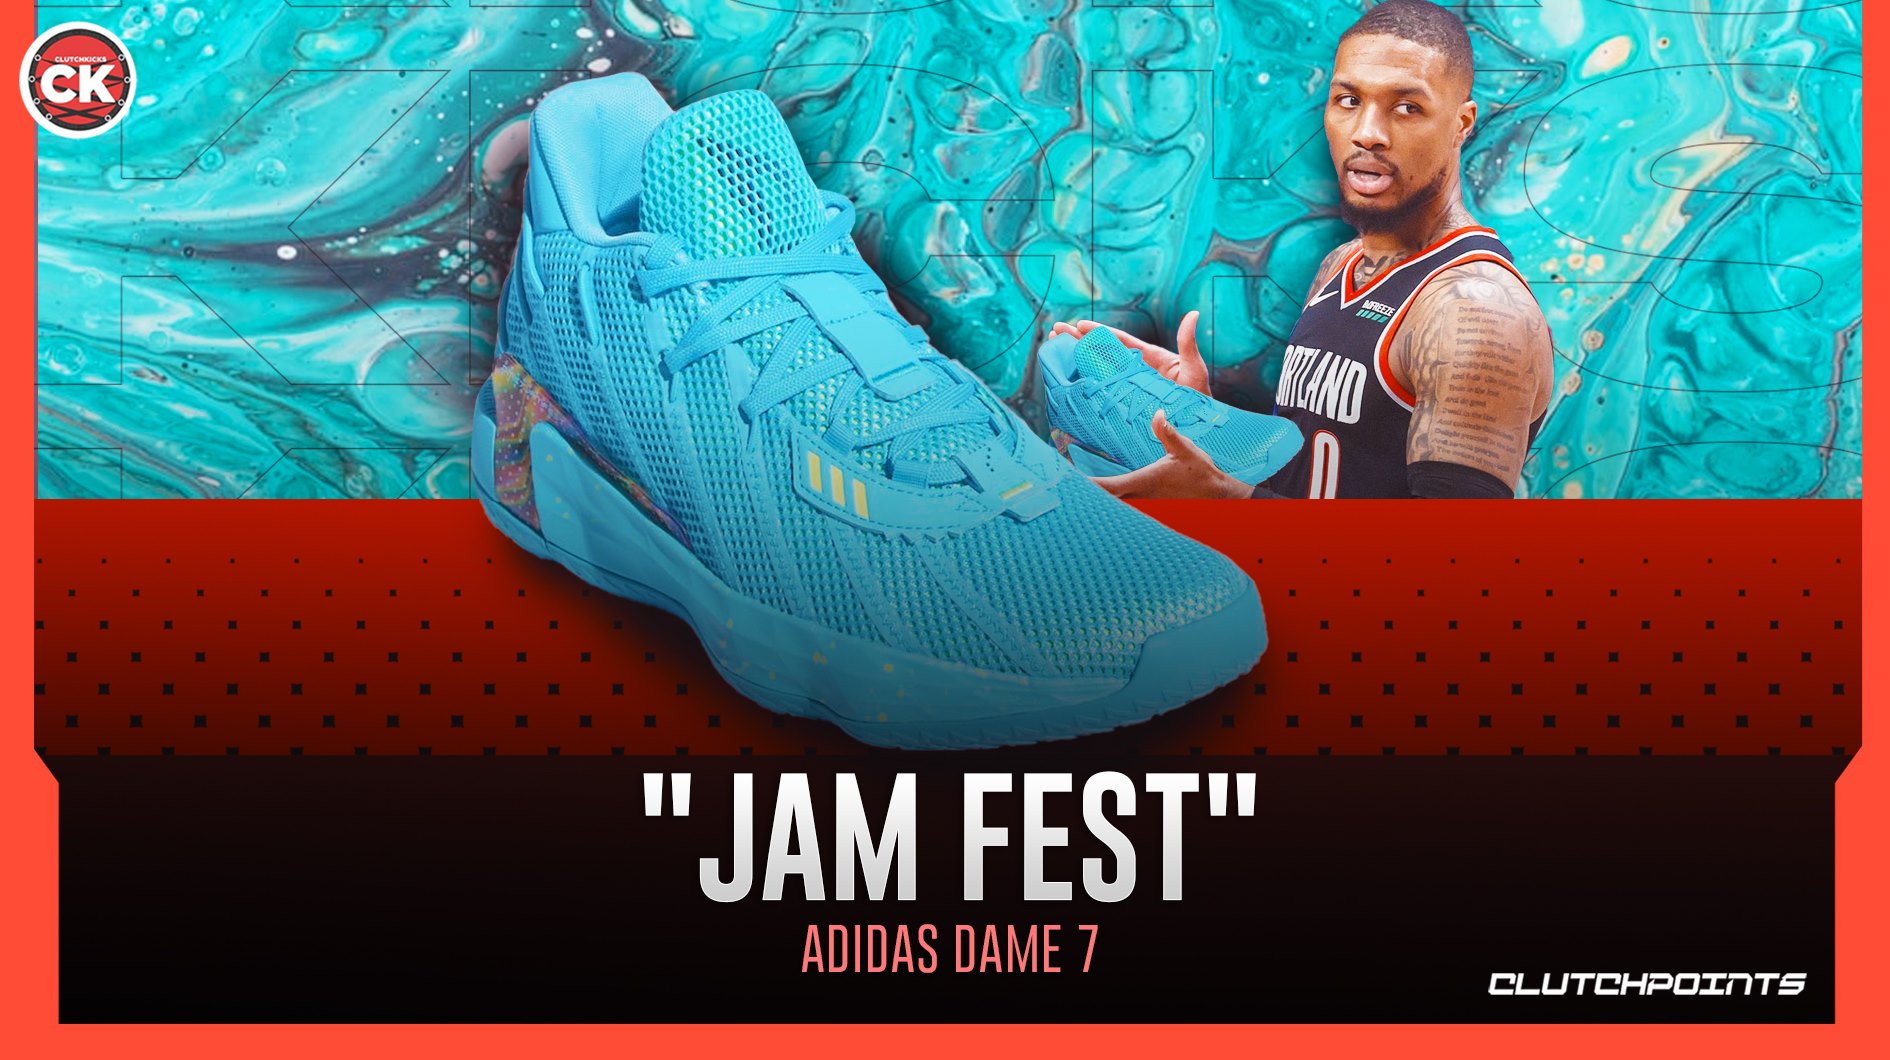 Twitter 上的Blazers Nation："Damian Lillard's 7th signature shoe with Adidas will be dressed turquoise 🔷 The "Jam edition of the Dame 7's will be released on 17 at $110